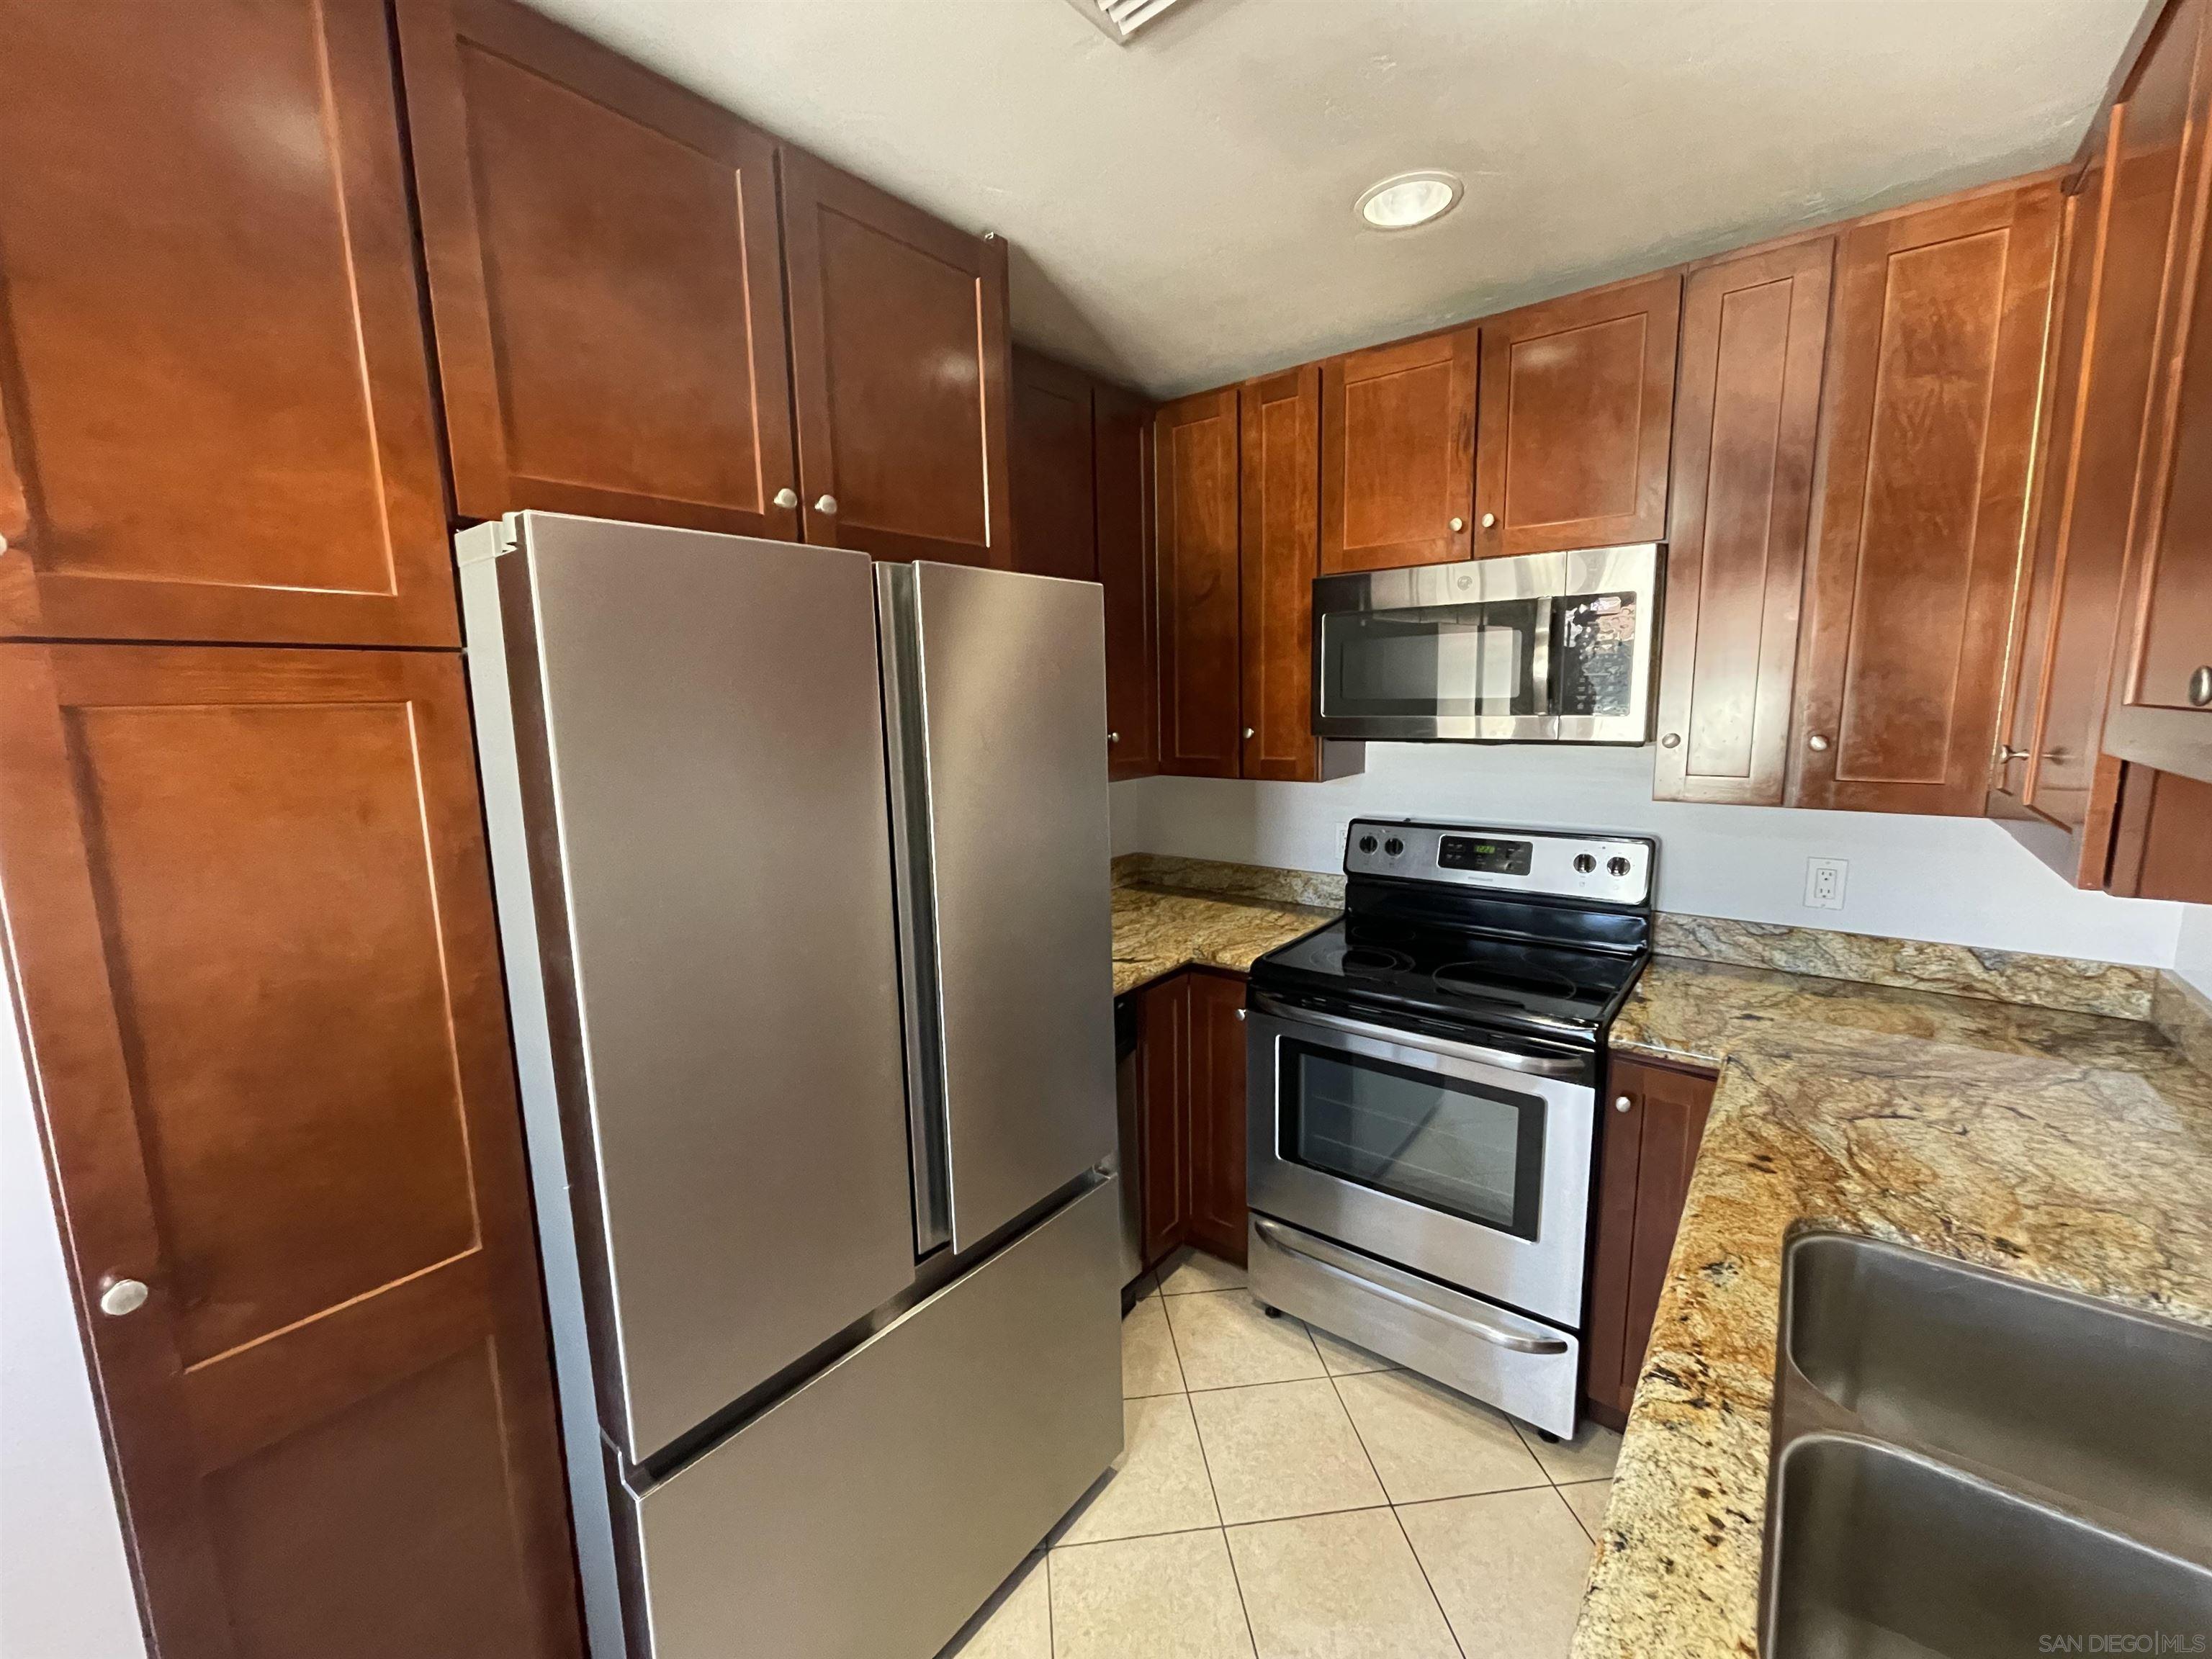 a kitchen with metallic refrigerator sink and microwave